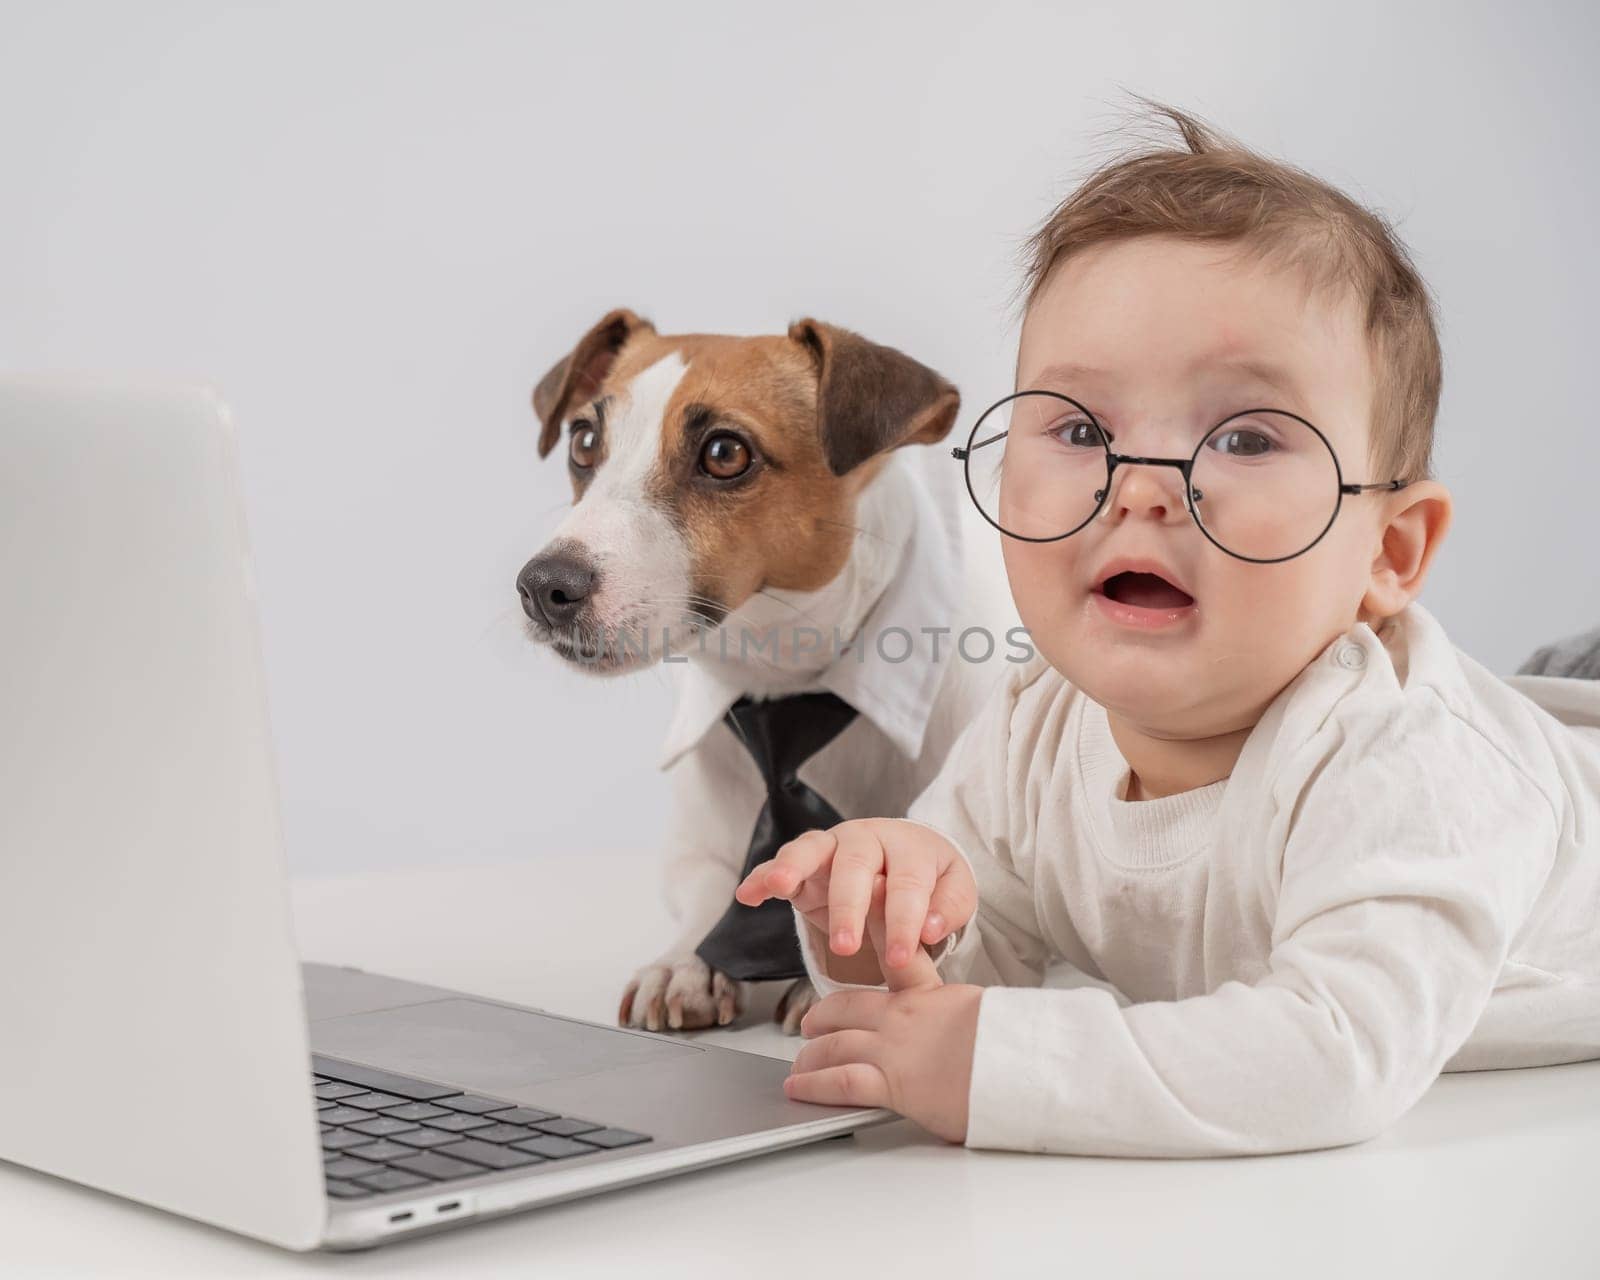 Cute baby boy and Jack Russell terrier dog working on a laptop. by mrwed54